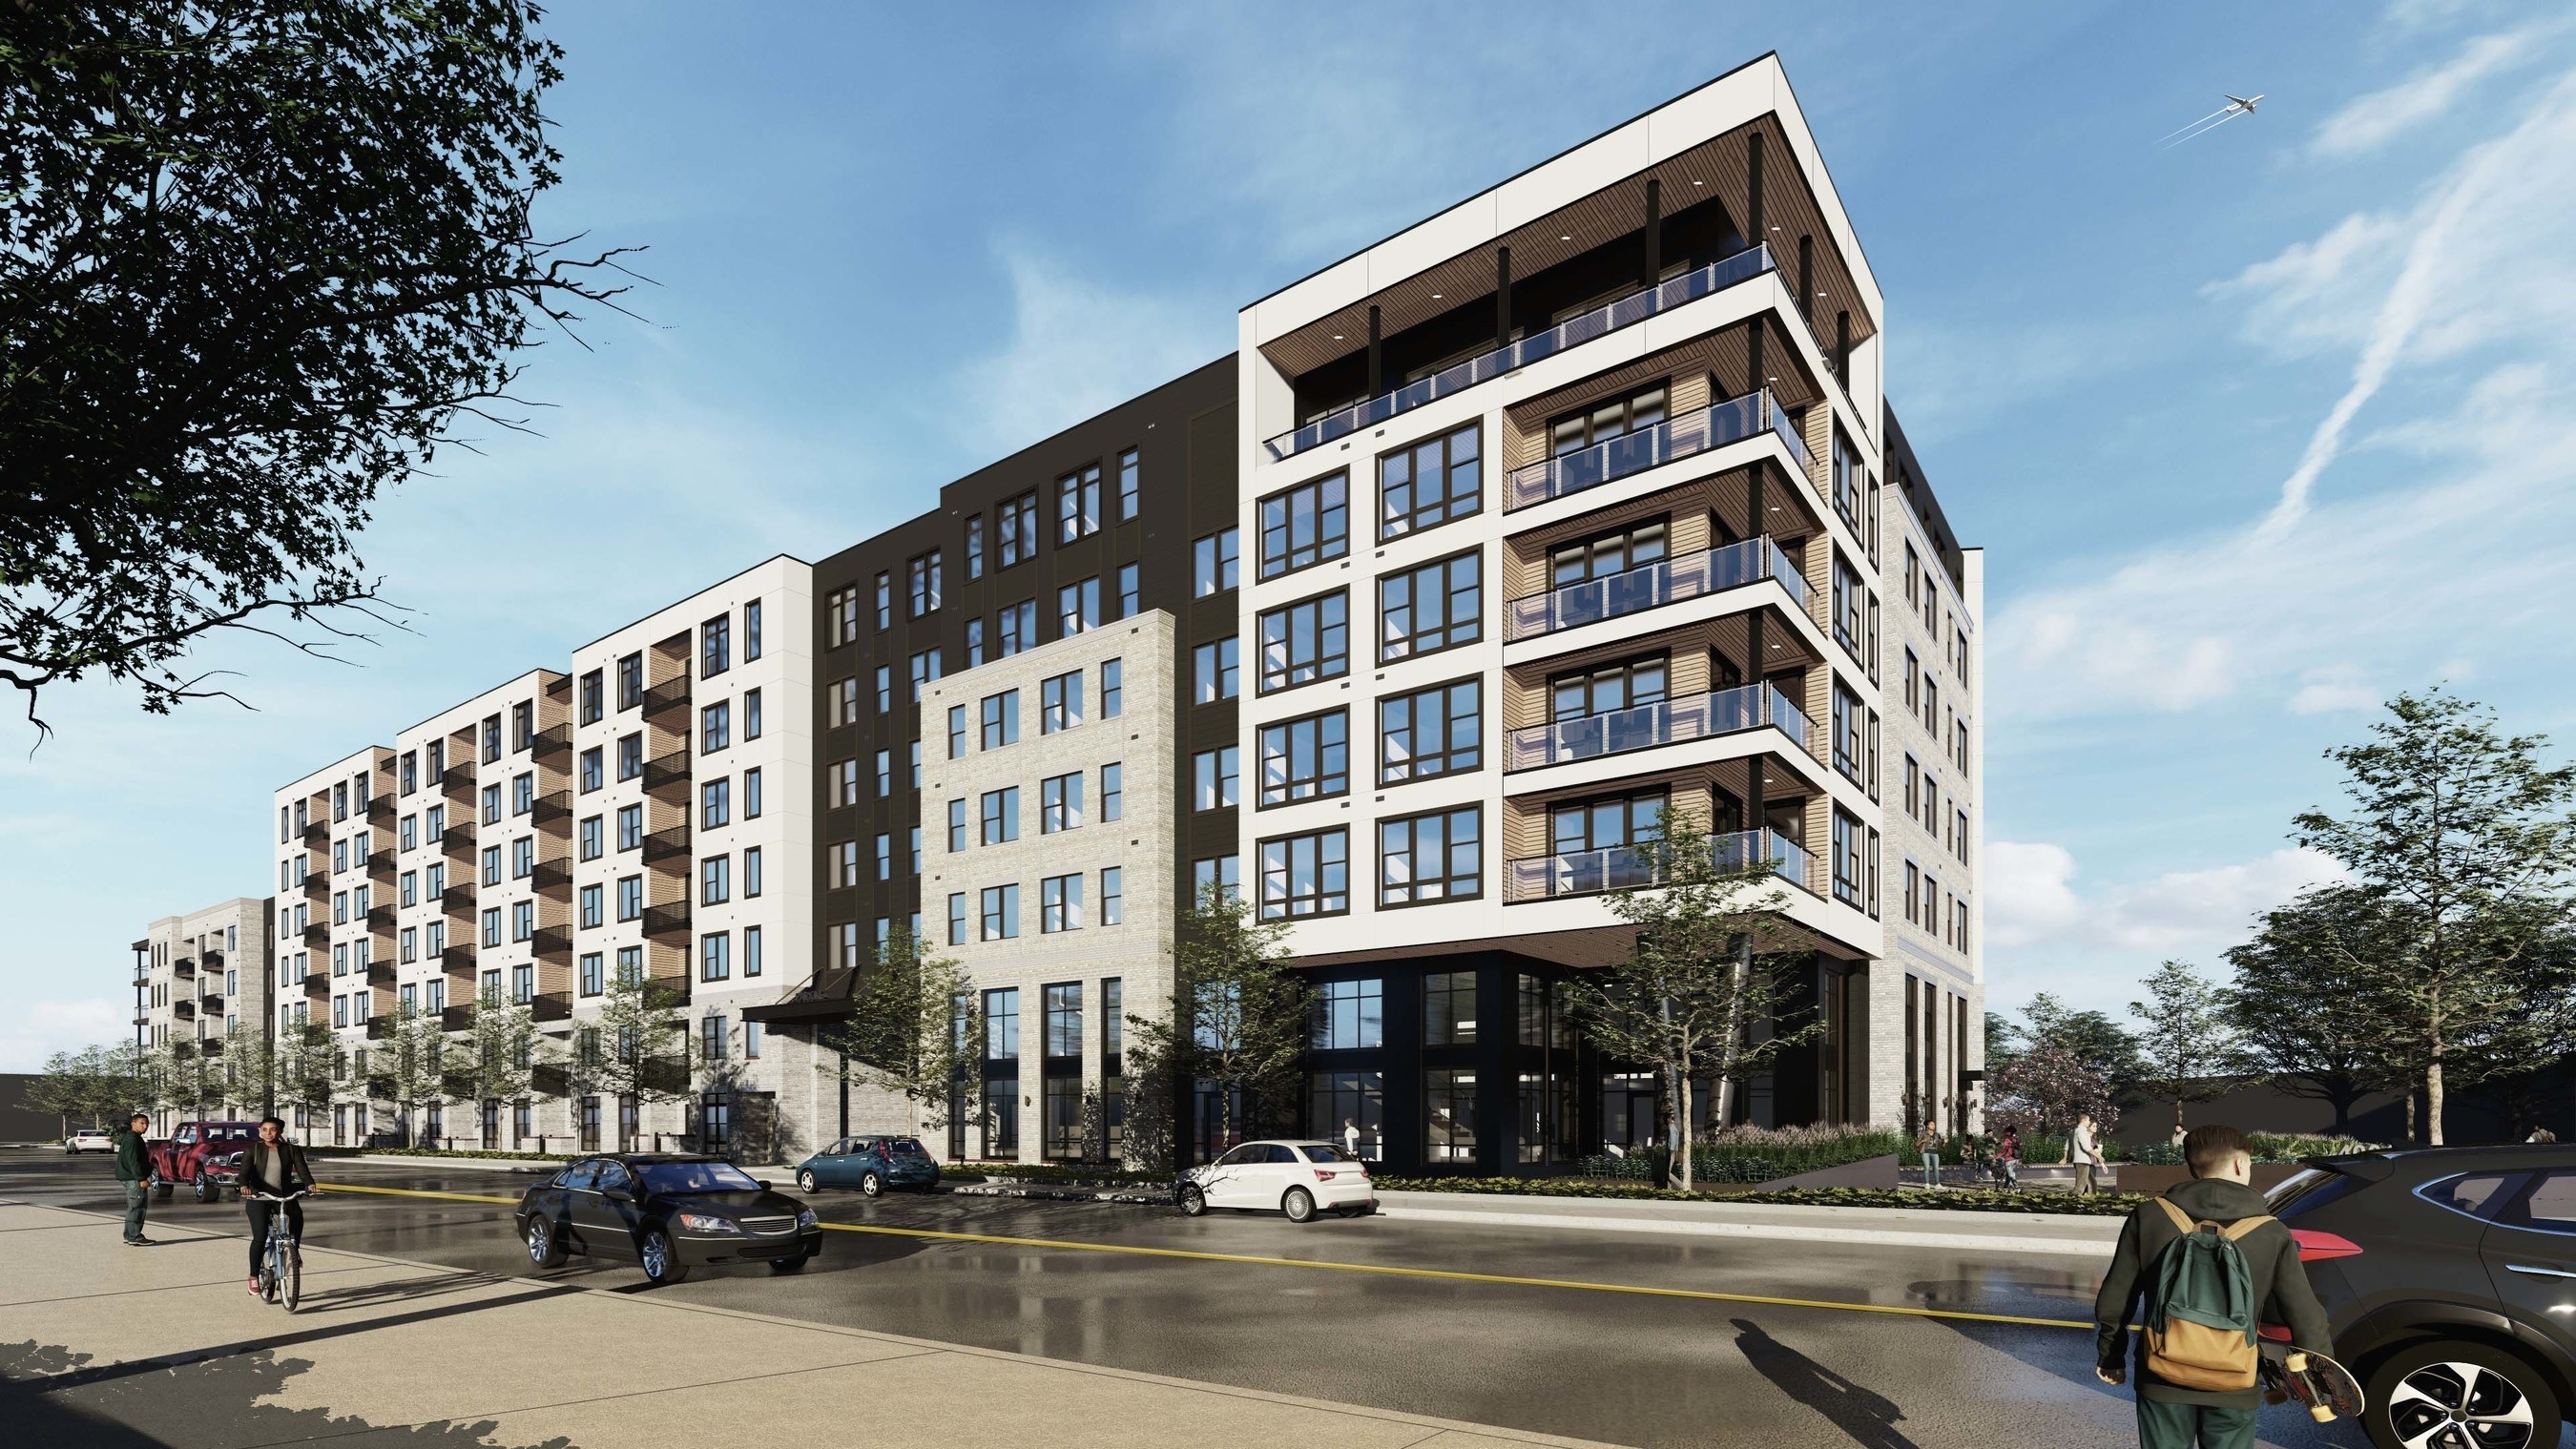 Embrey Closes Land Purchase to Begin Construction on 403-Unit Luxury Multifamily Community in Charlotte's Lower South End